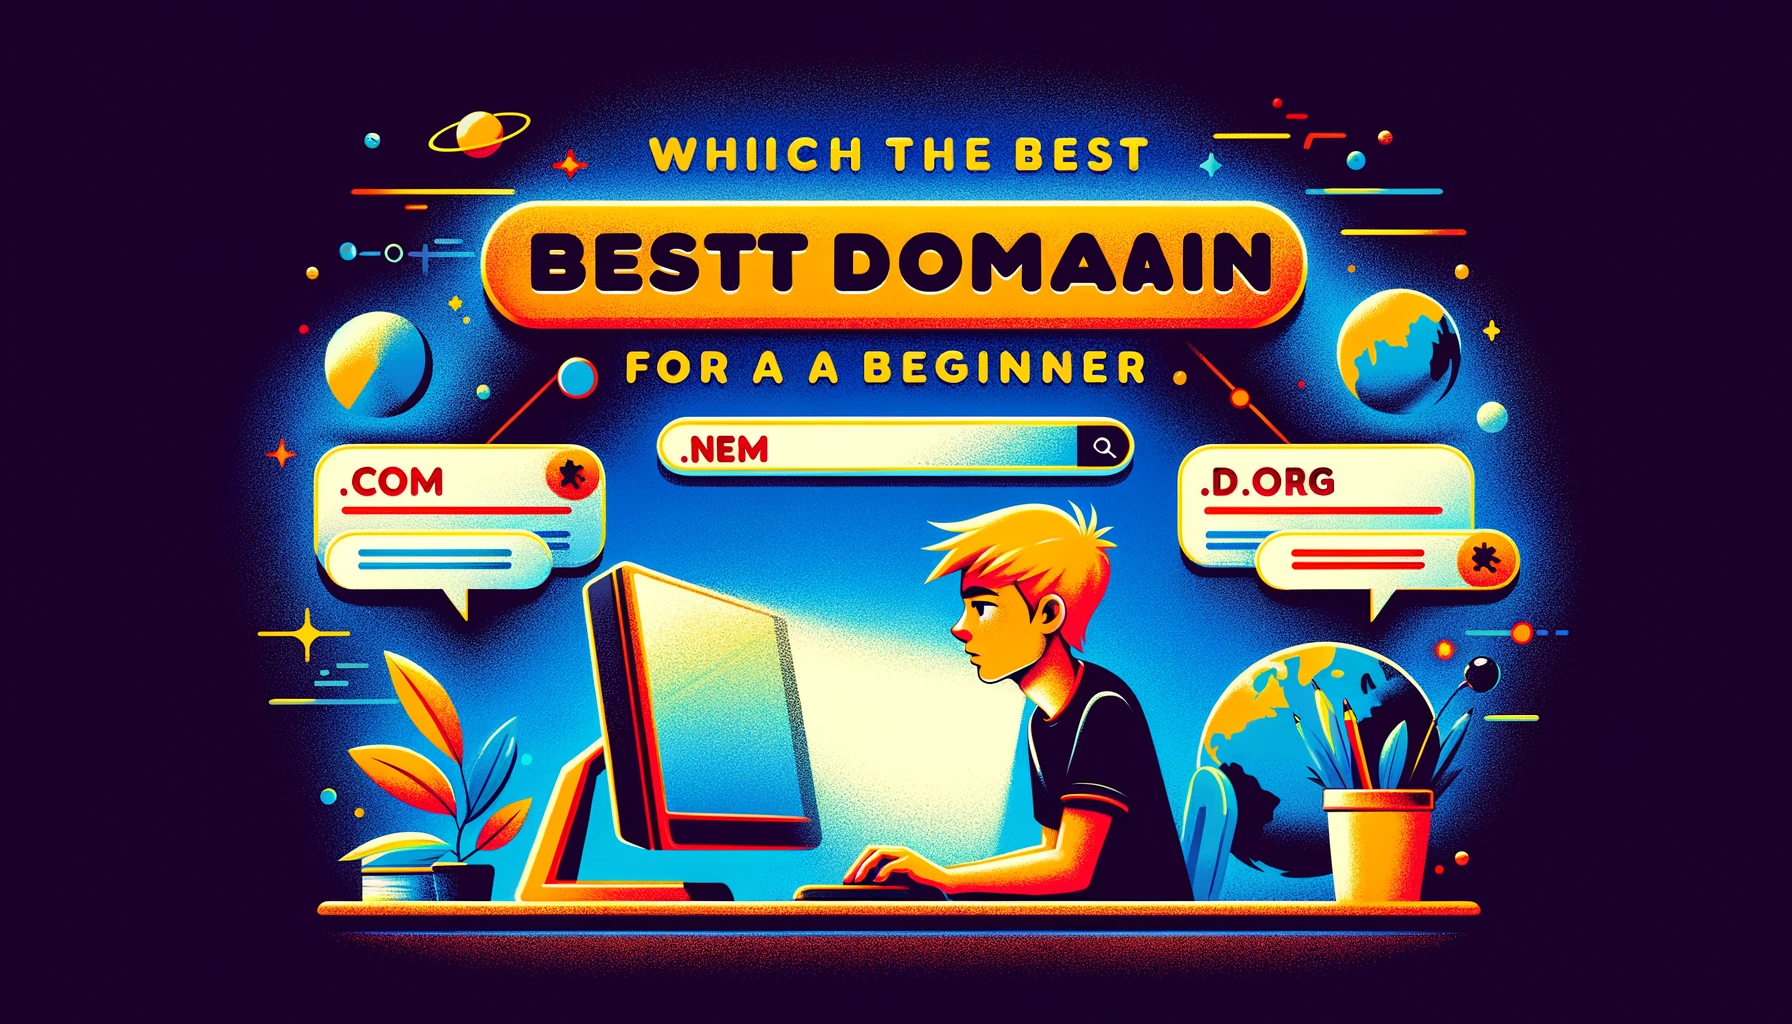 Which Is The Best Domain For A Beginner?